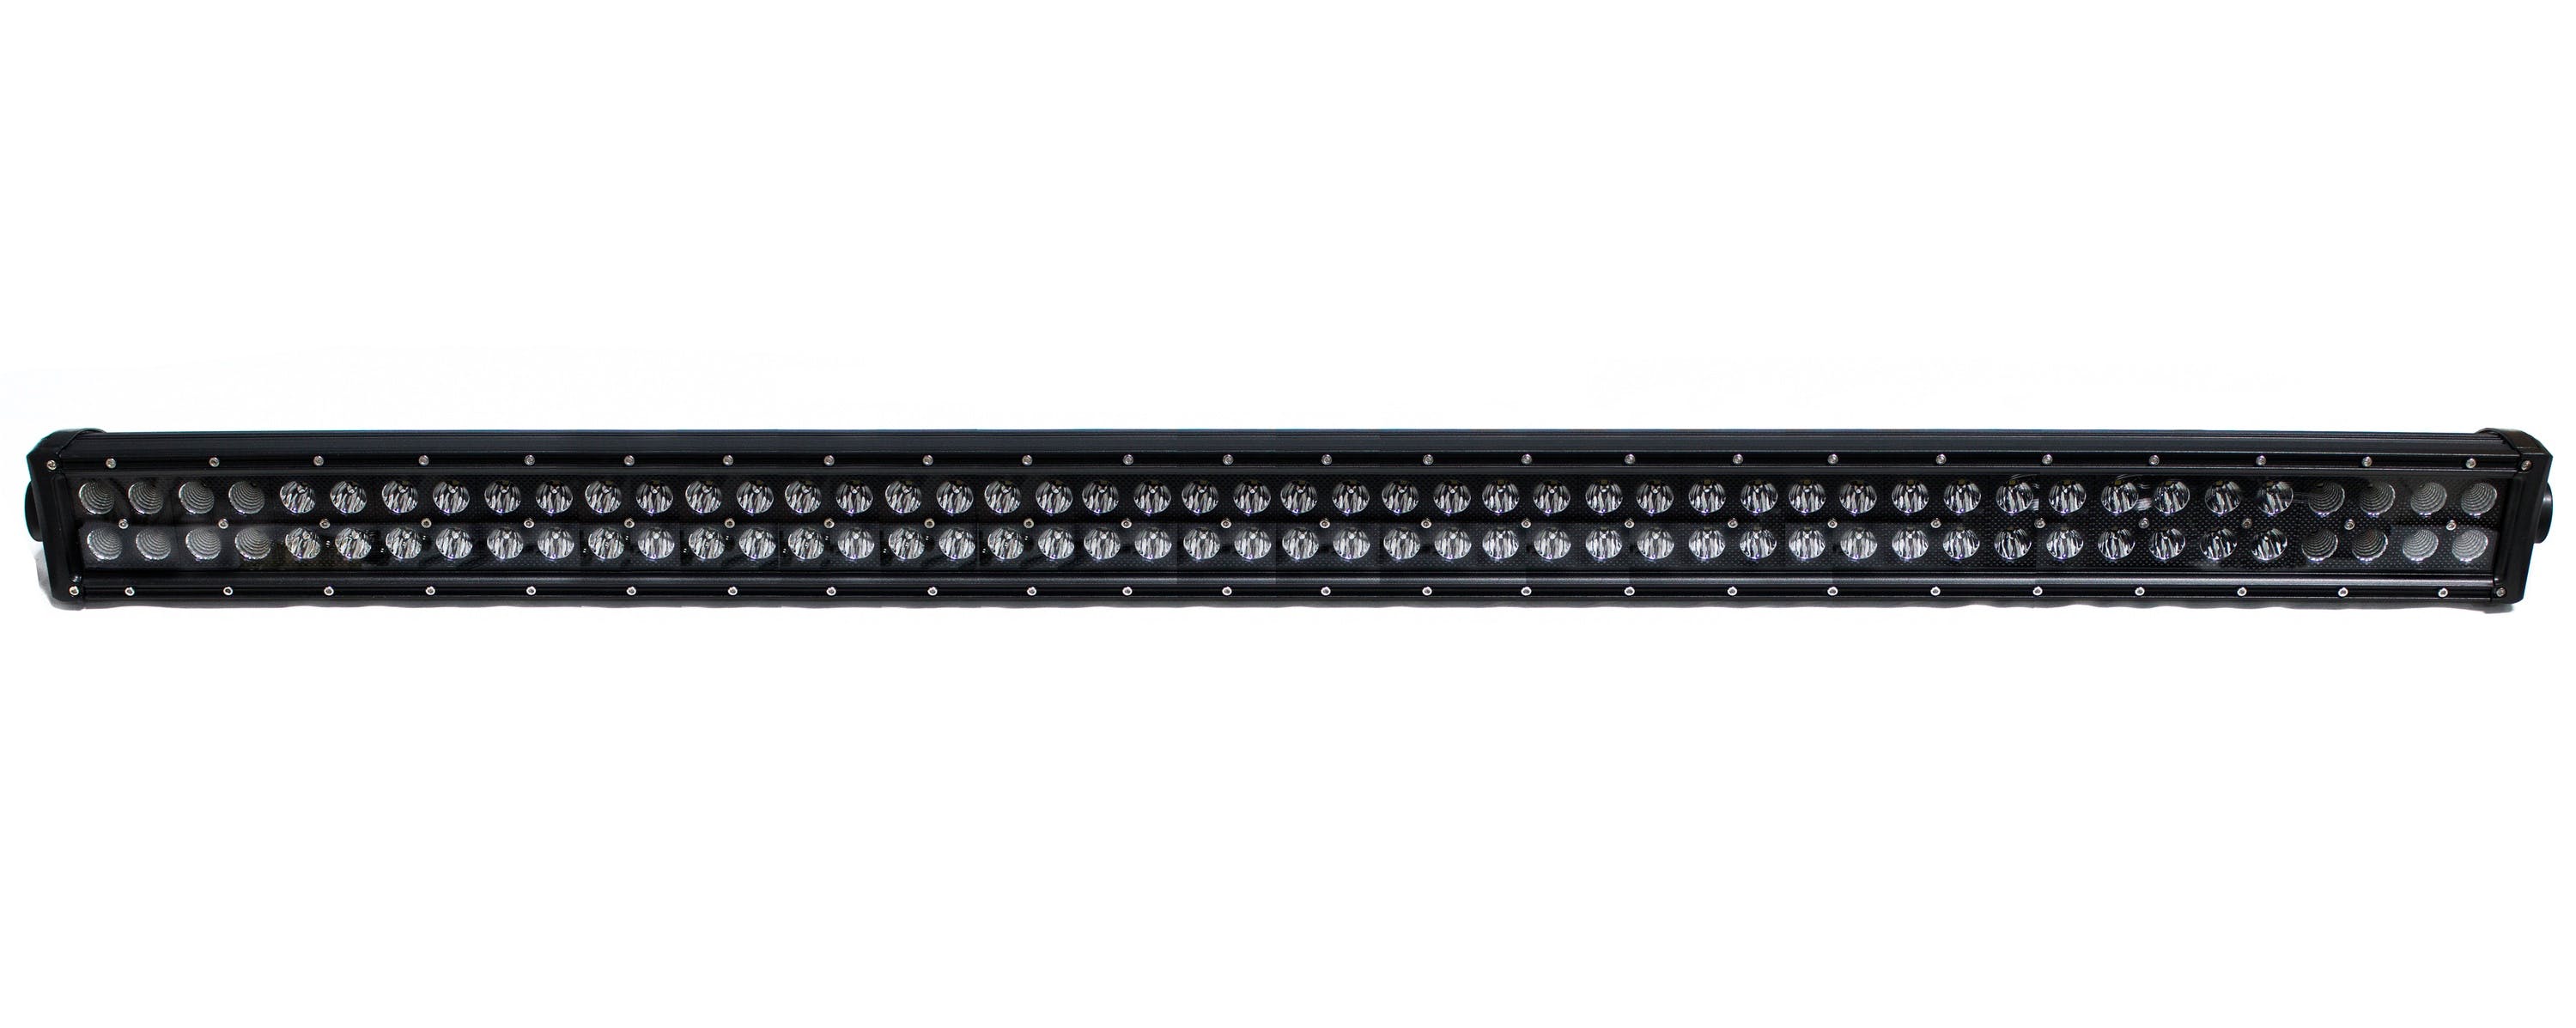 Race Sport Lighting RSBO288 Blacked Out Series 50in Straight, Double Row, Silver Combo-Flood/Beam